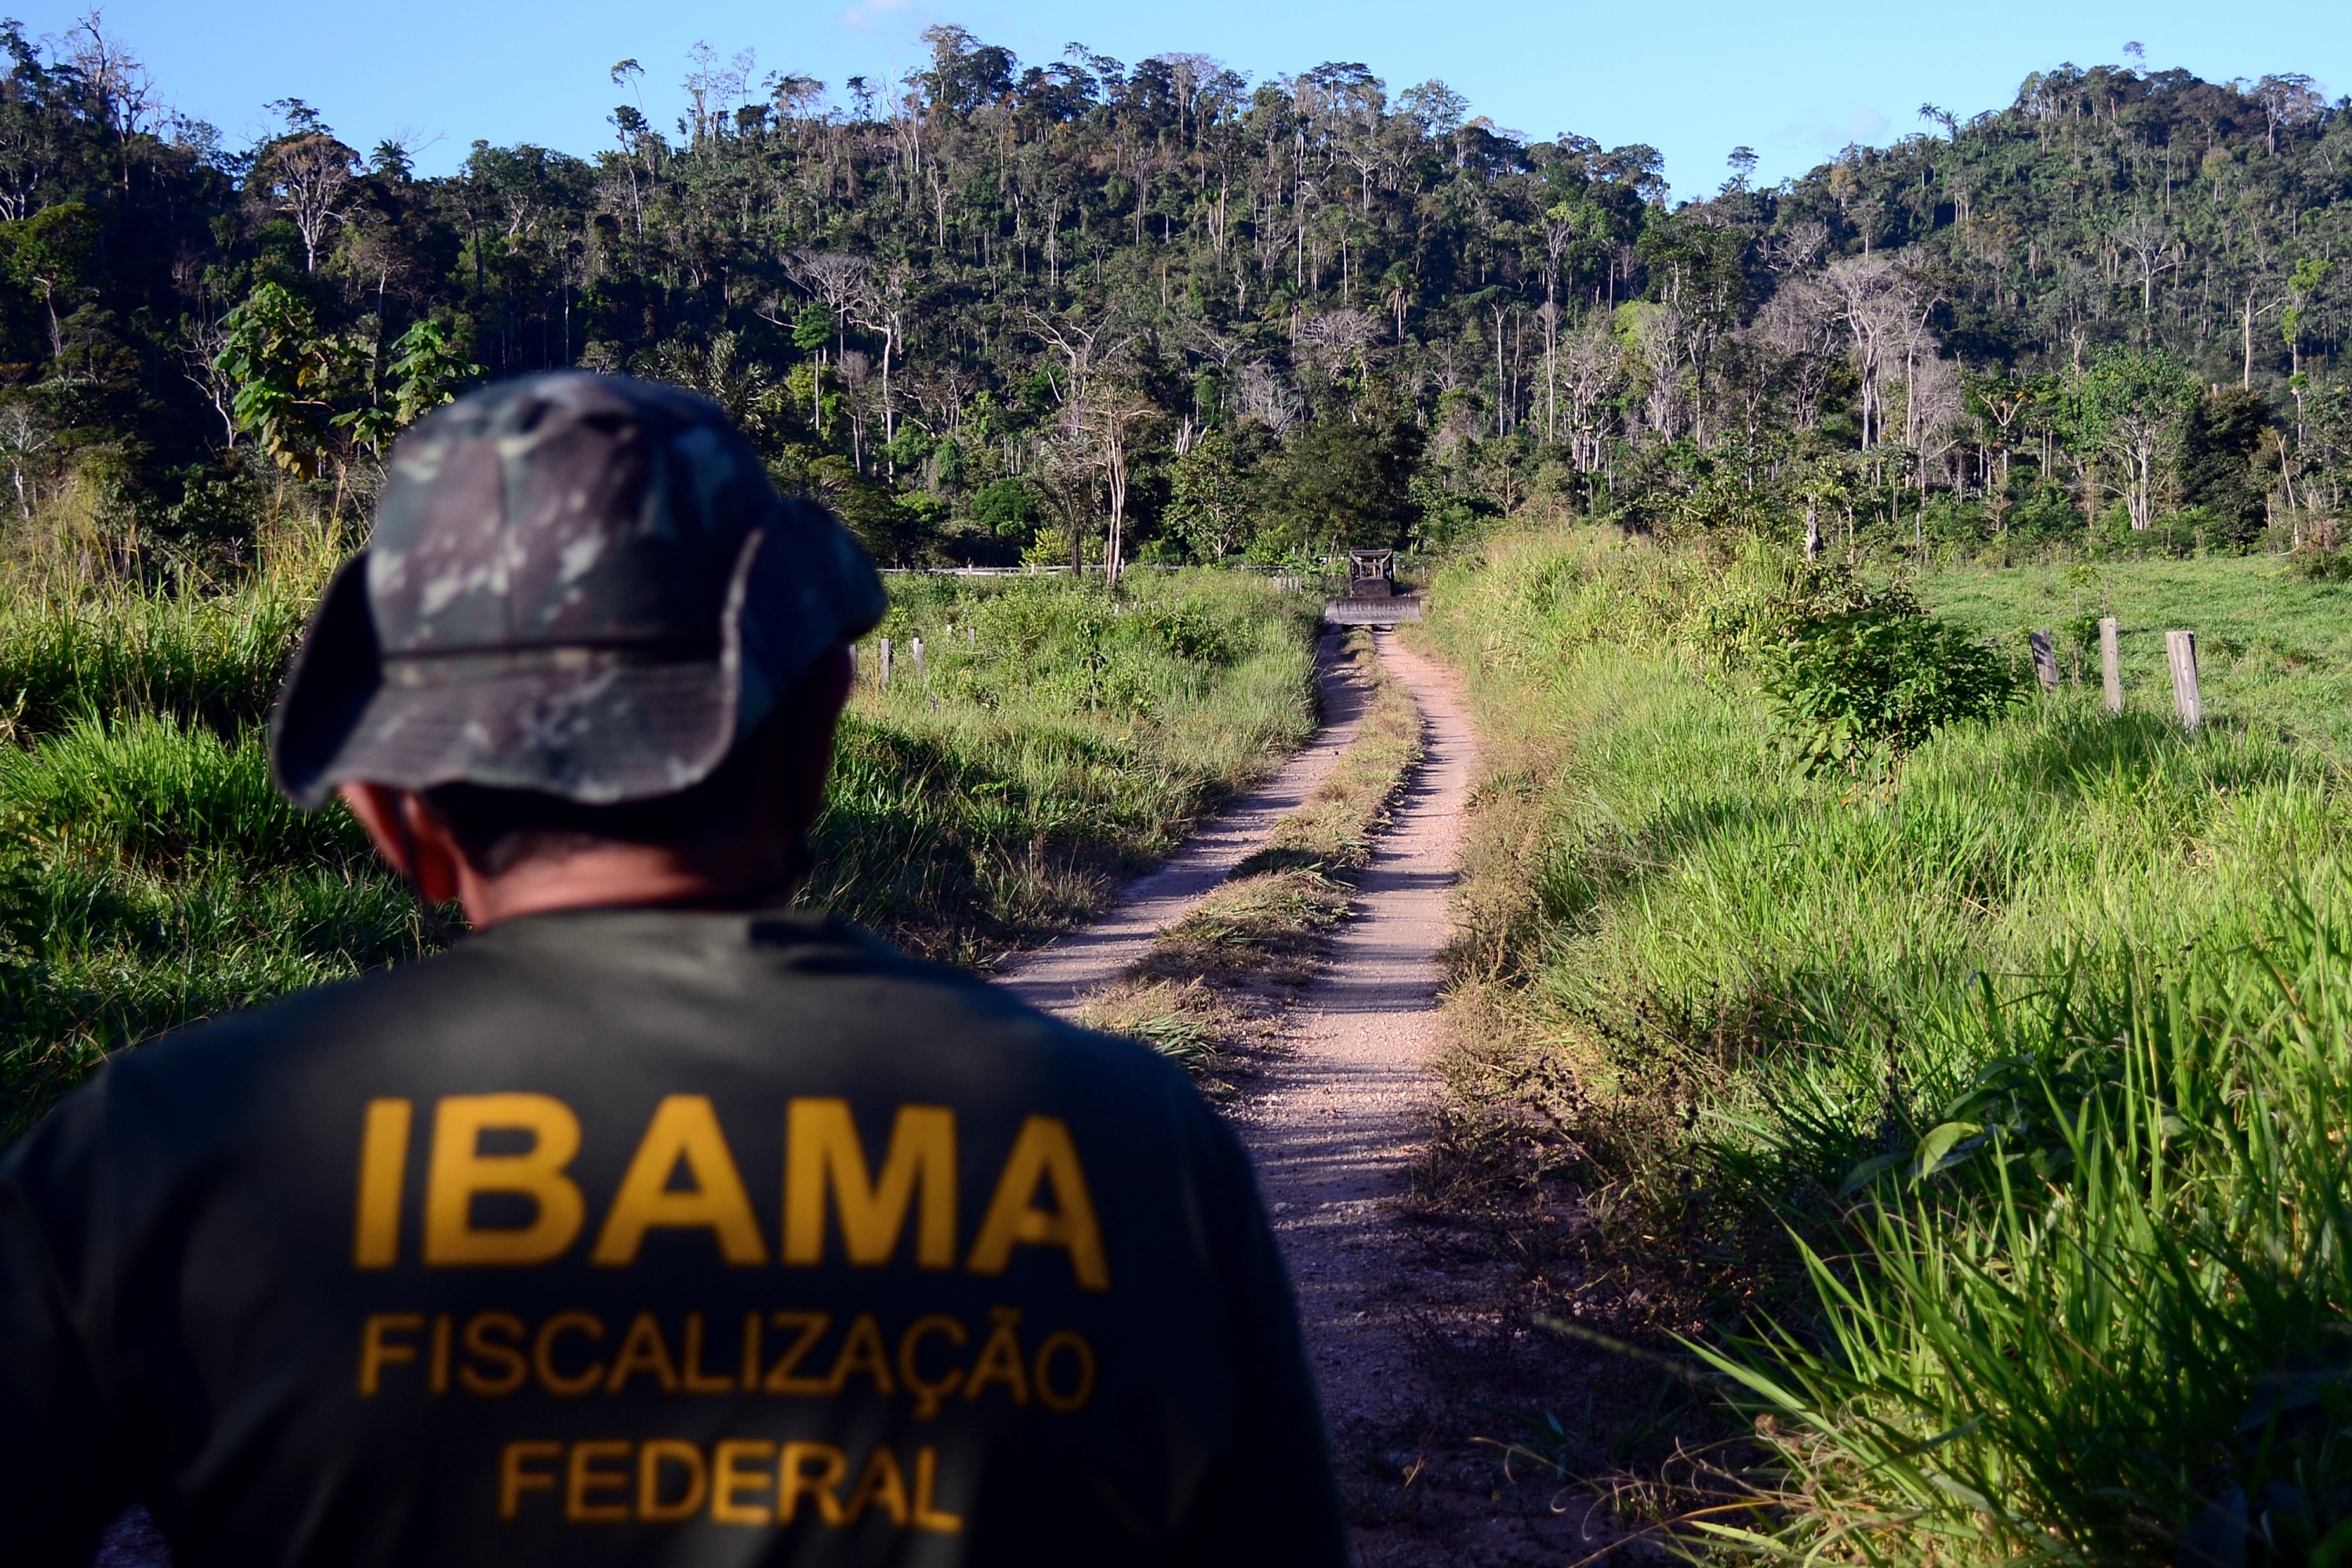 President Jair Bolsonaro has been criticized for dismantling IBAMA, Brazil's environment agency. In this photo IBAMA agents remove deforestation machinery from the forest. Image by Vinícius Mendonça/Ibama [CC BY 2.0.]